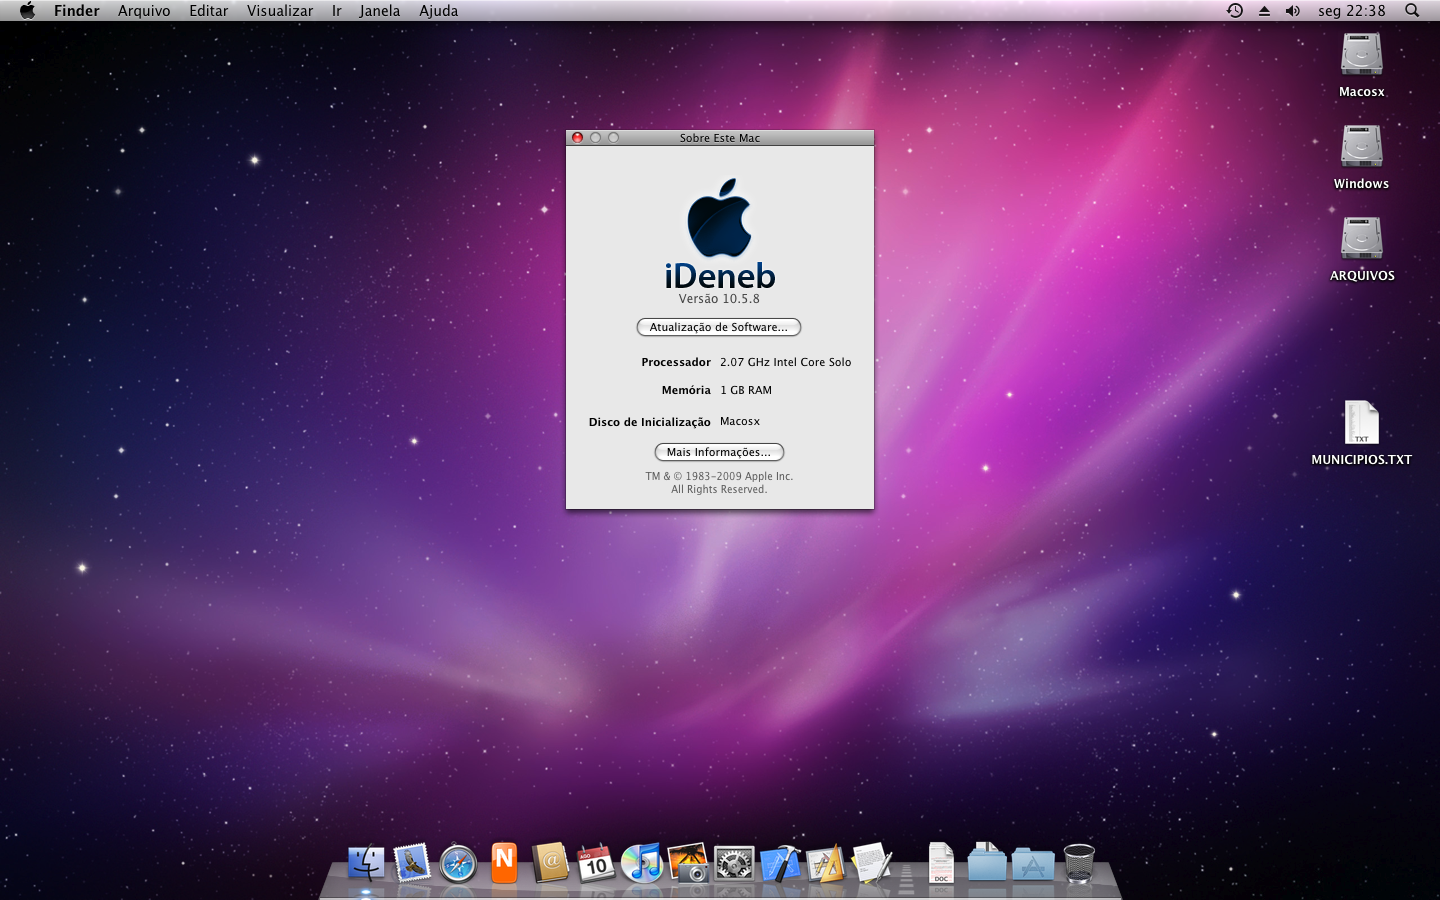 mac os x server 10.6 download iso